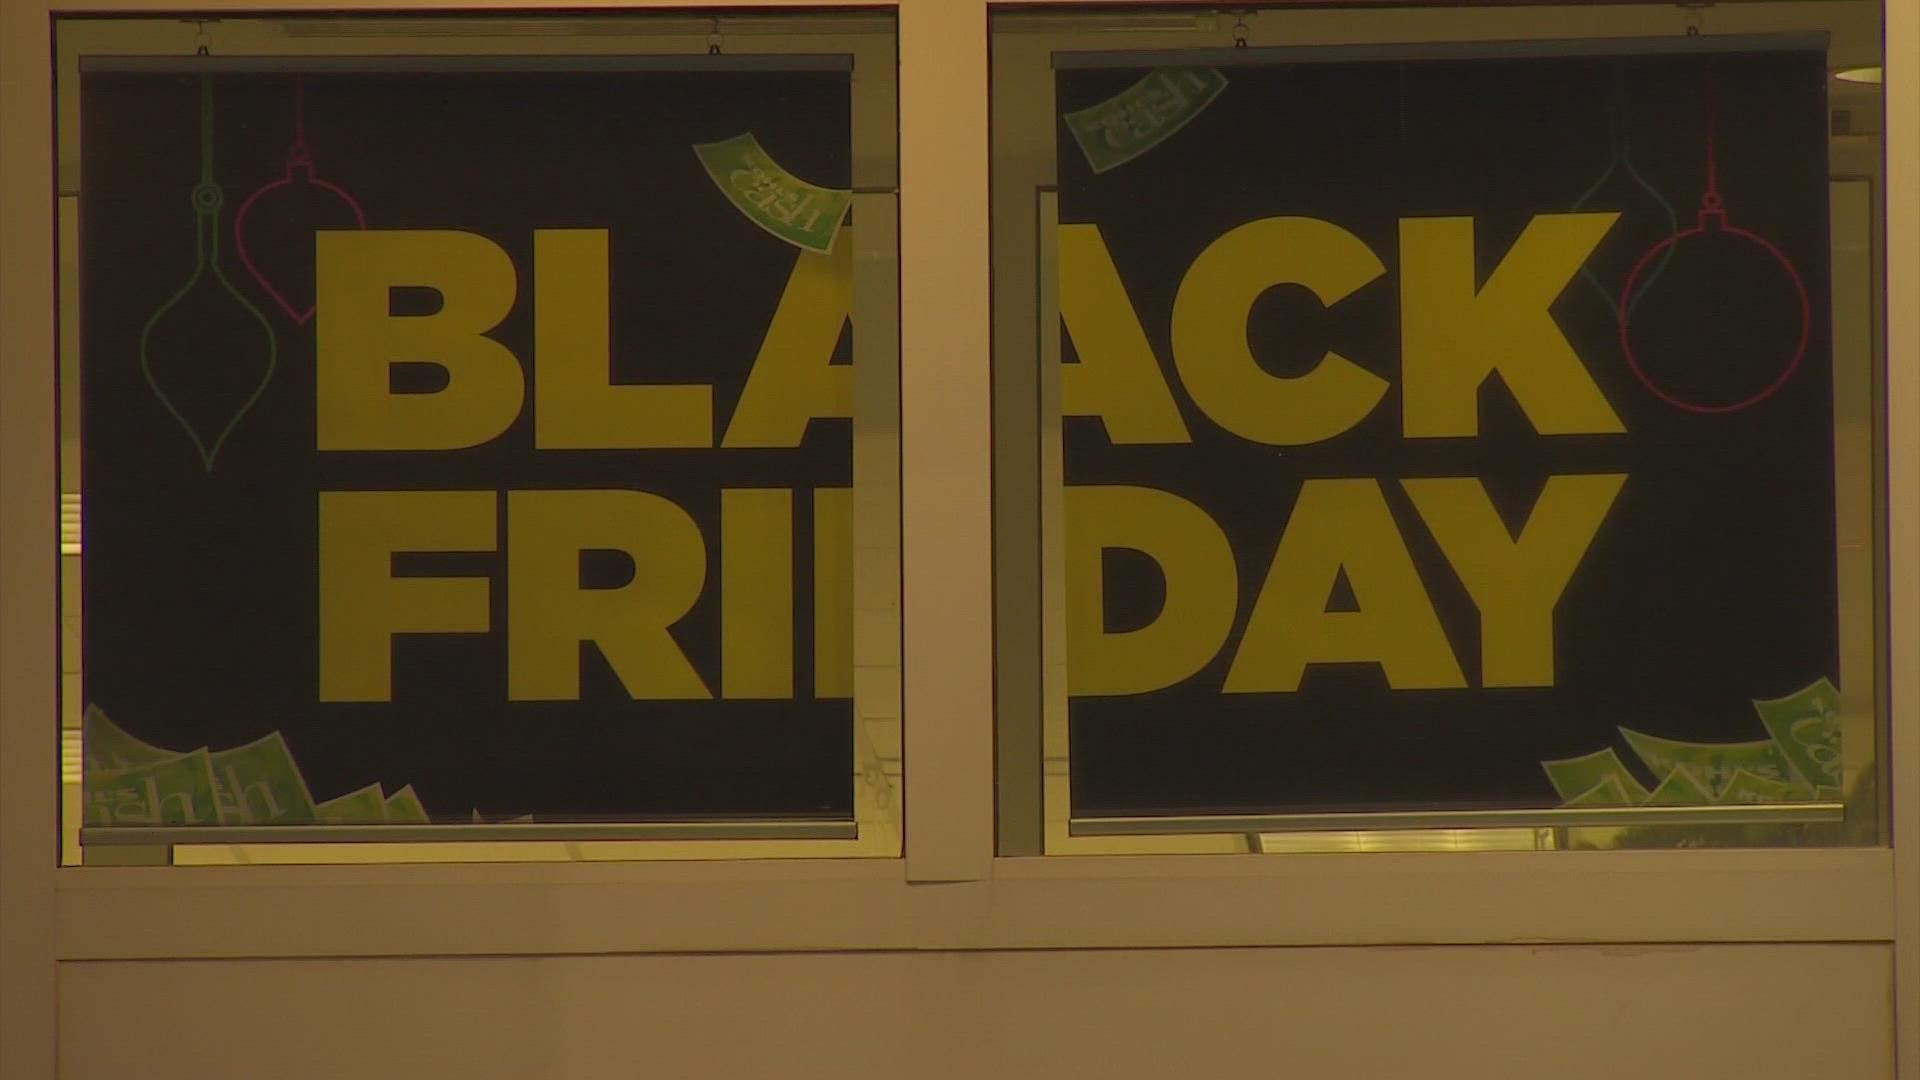 Black Friday is generally the start of the holiday season. But a lot of retailers have already unveiled their holiday collections and savings as early as October.